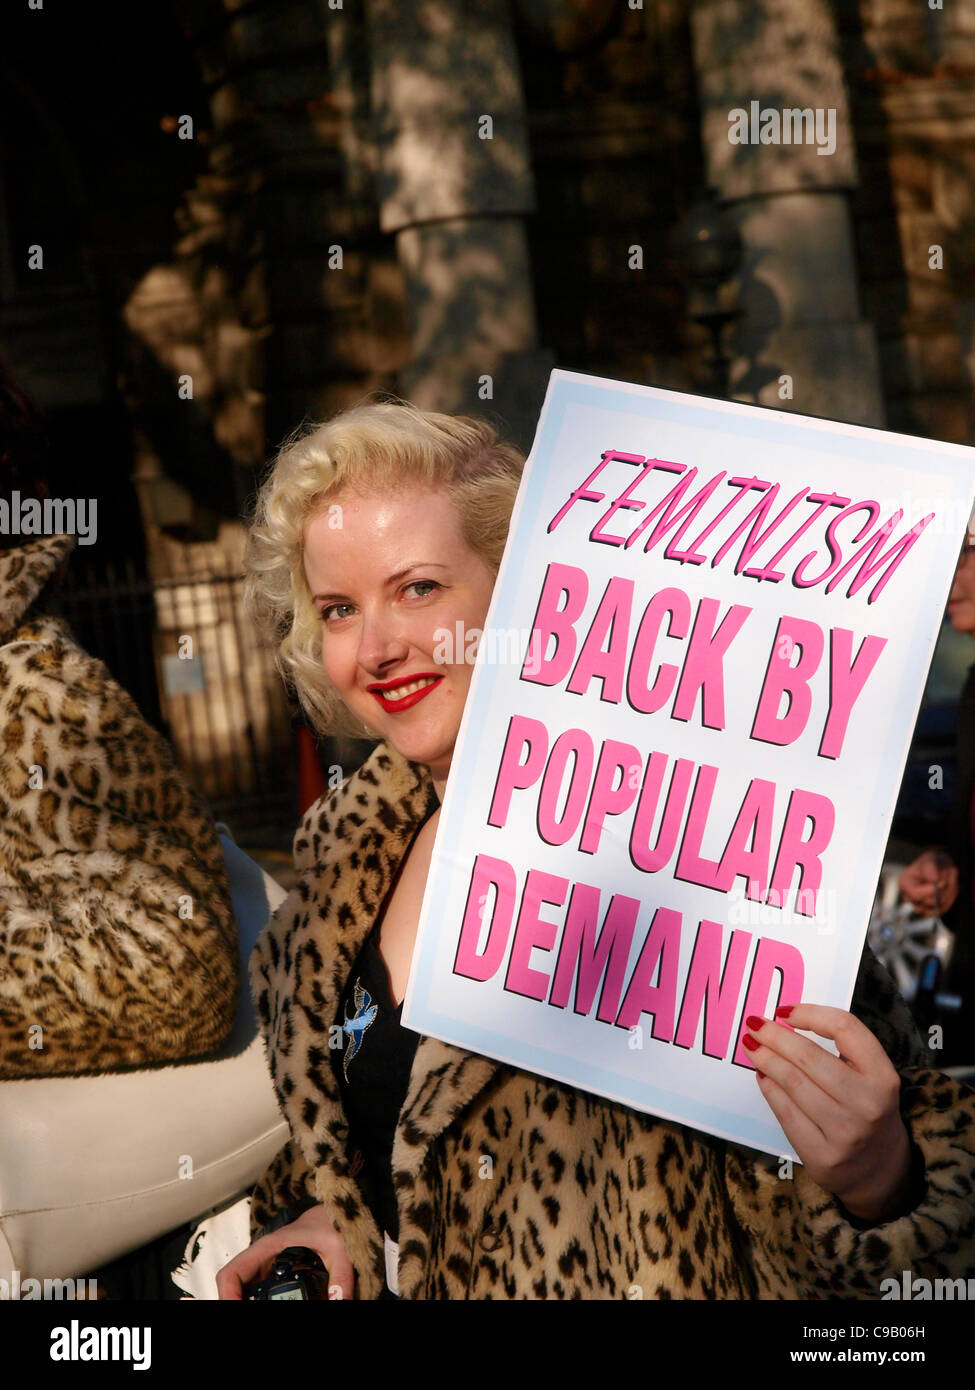 London, UK. 19th November 2011. Fawcett Society members and supporters marching and campaigning today to tell David Cameron 'Don't turn back time on women's equality'.  The 50's themed demonstration is designed to highlight the growing inequality affecting women. Stock Photo